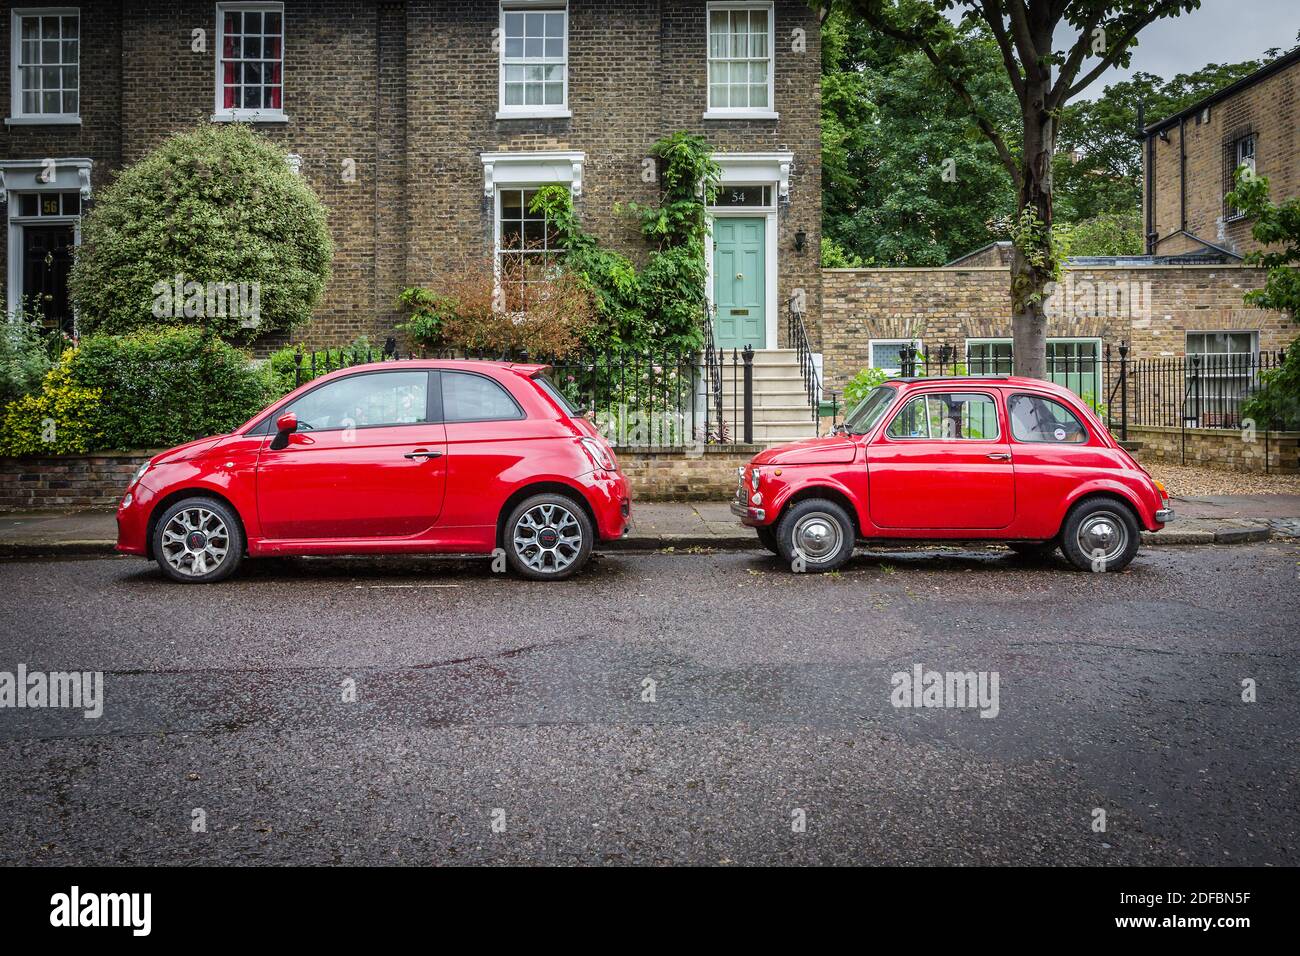 Two generations of the Fiat 500 in the same red colour parked down a leafy London street. Stock Photo